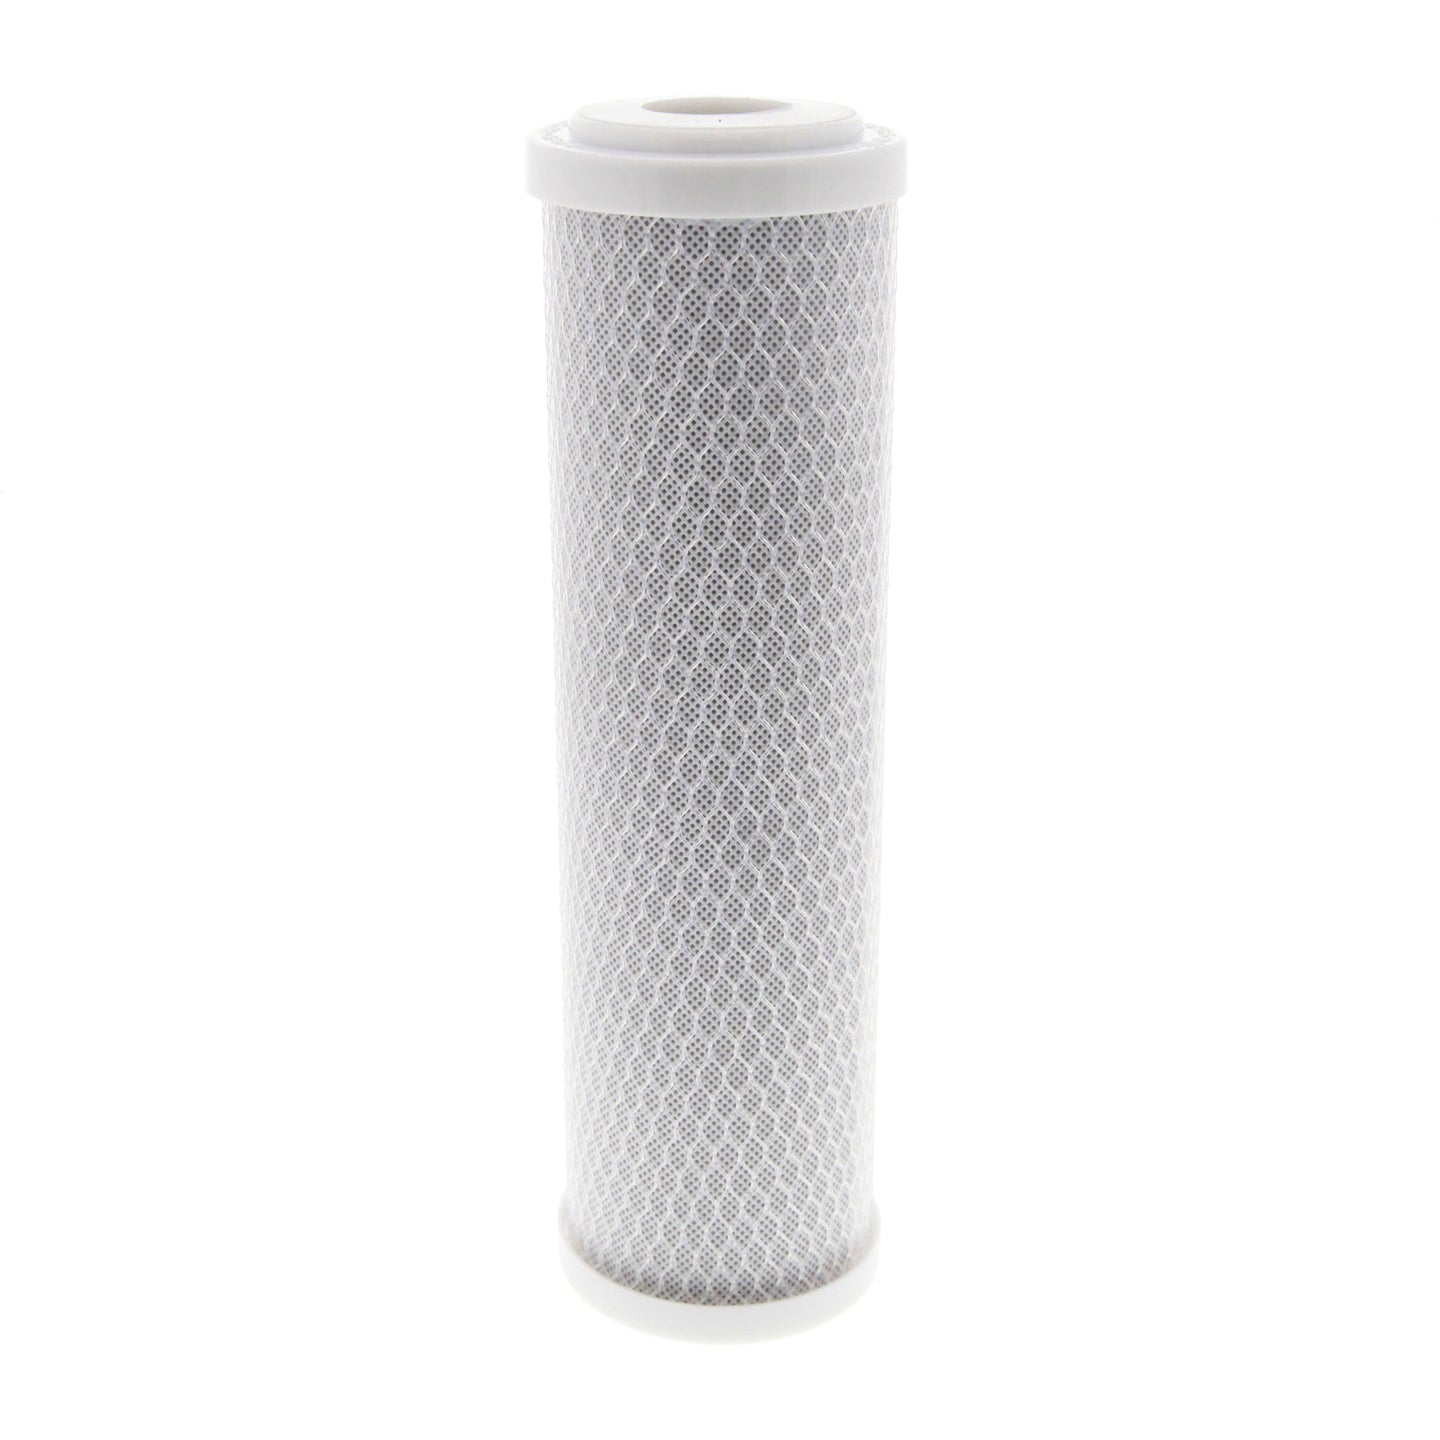 10 X 2.5 Carbon Block Replacement Filter by Tier1 (10 micron)